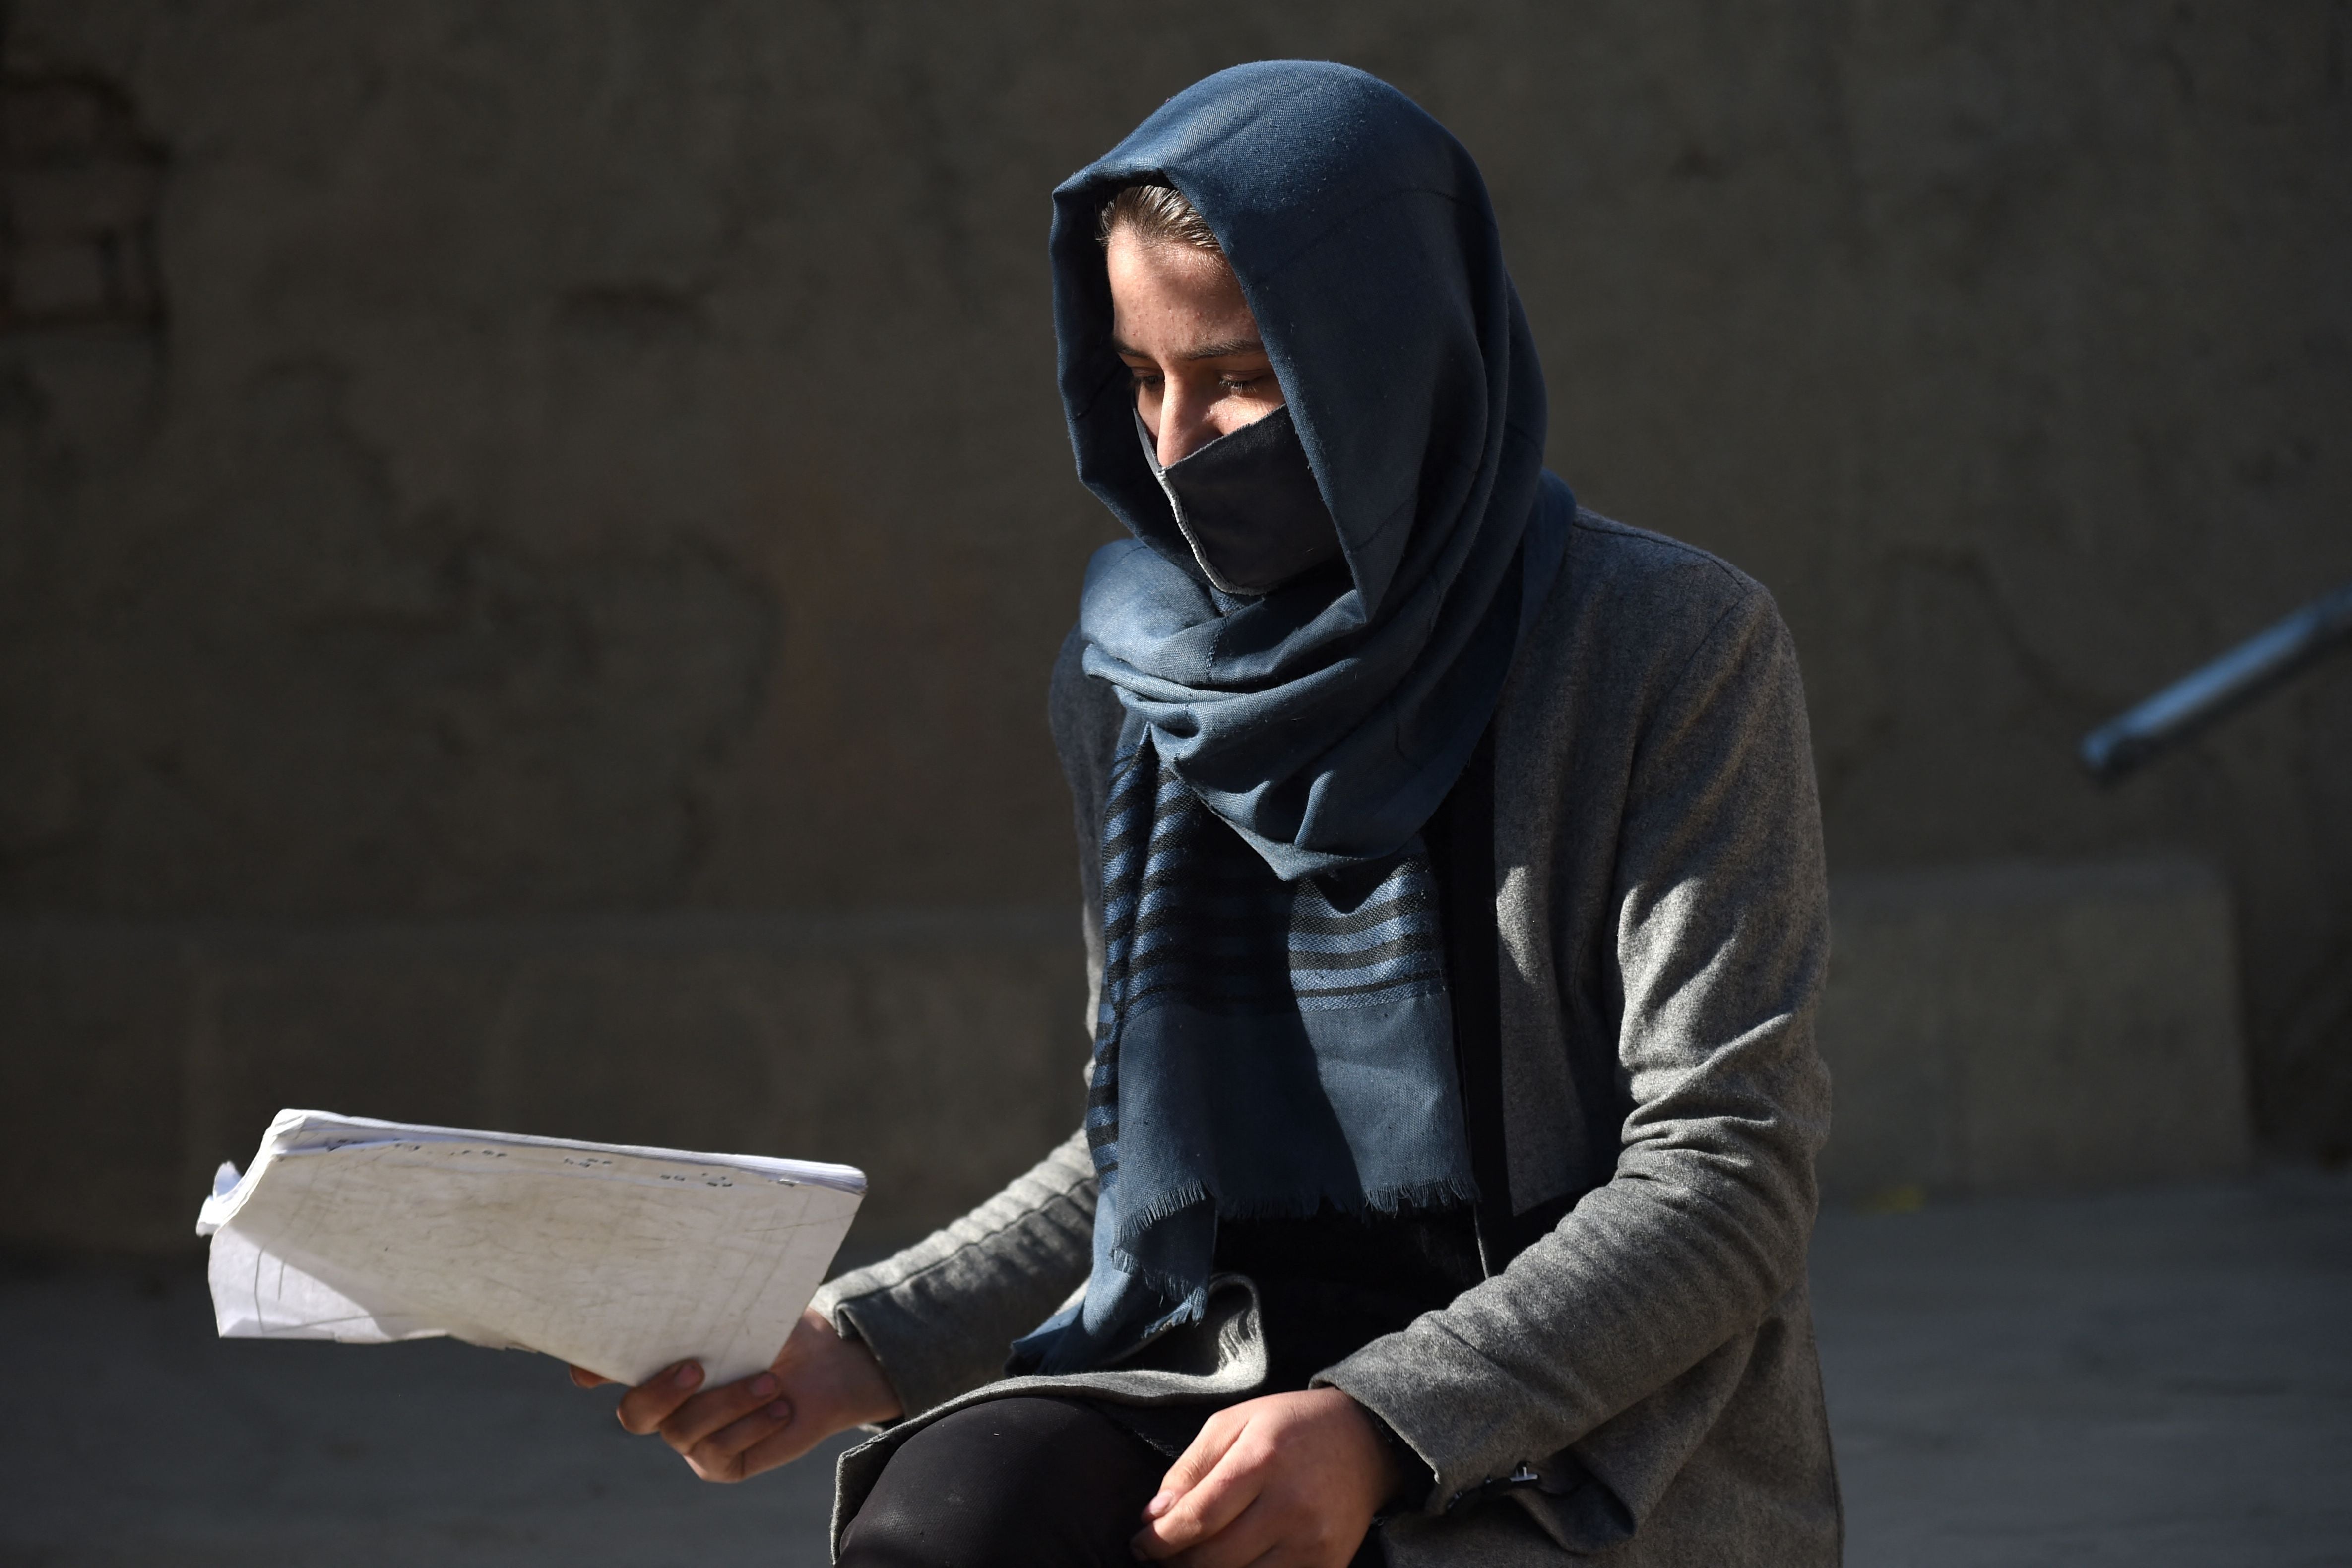 Marwa, from Kabul, was months away from becoming the first woman in her family to go to university. Iinstead, she will watch as her brother goes without her.